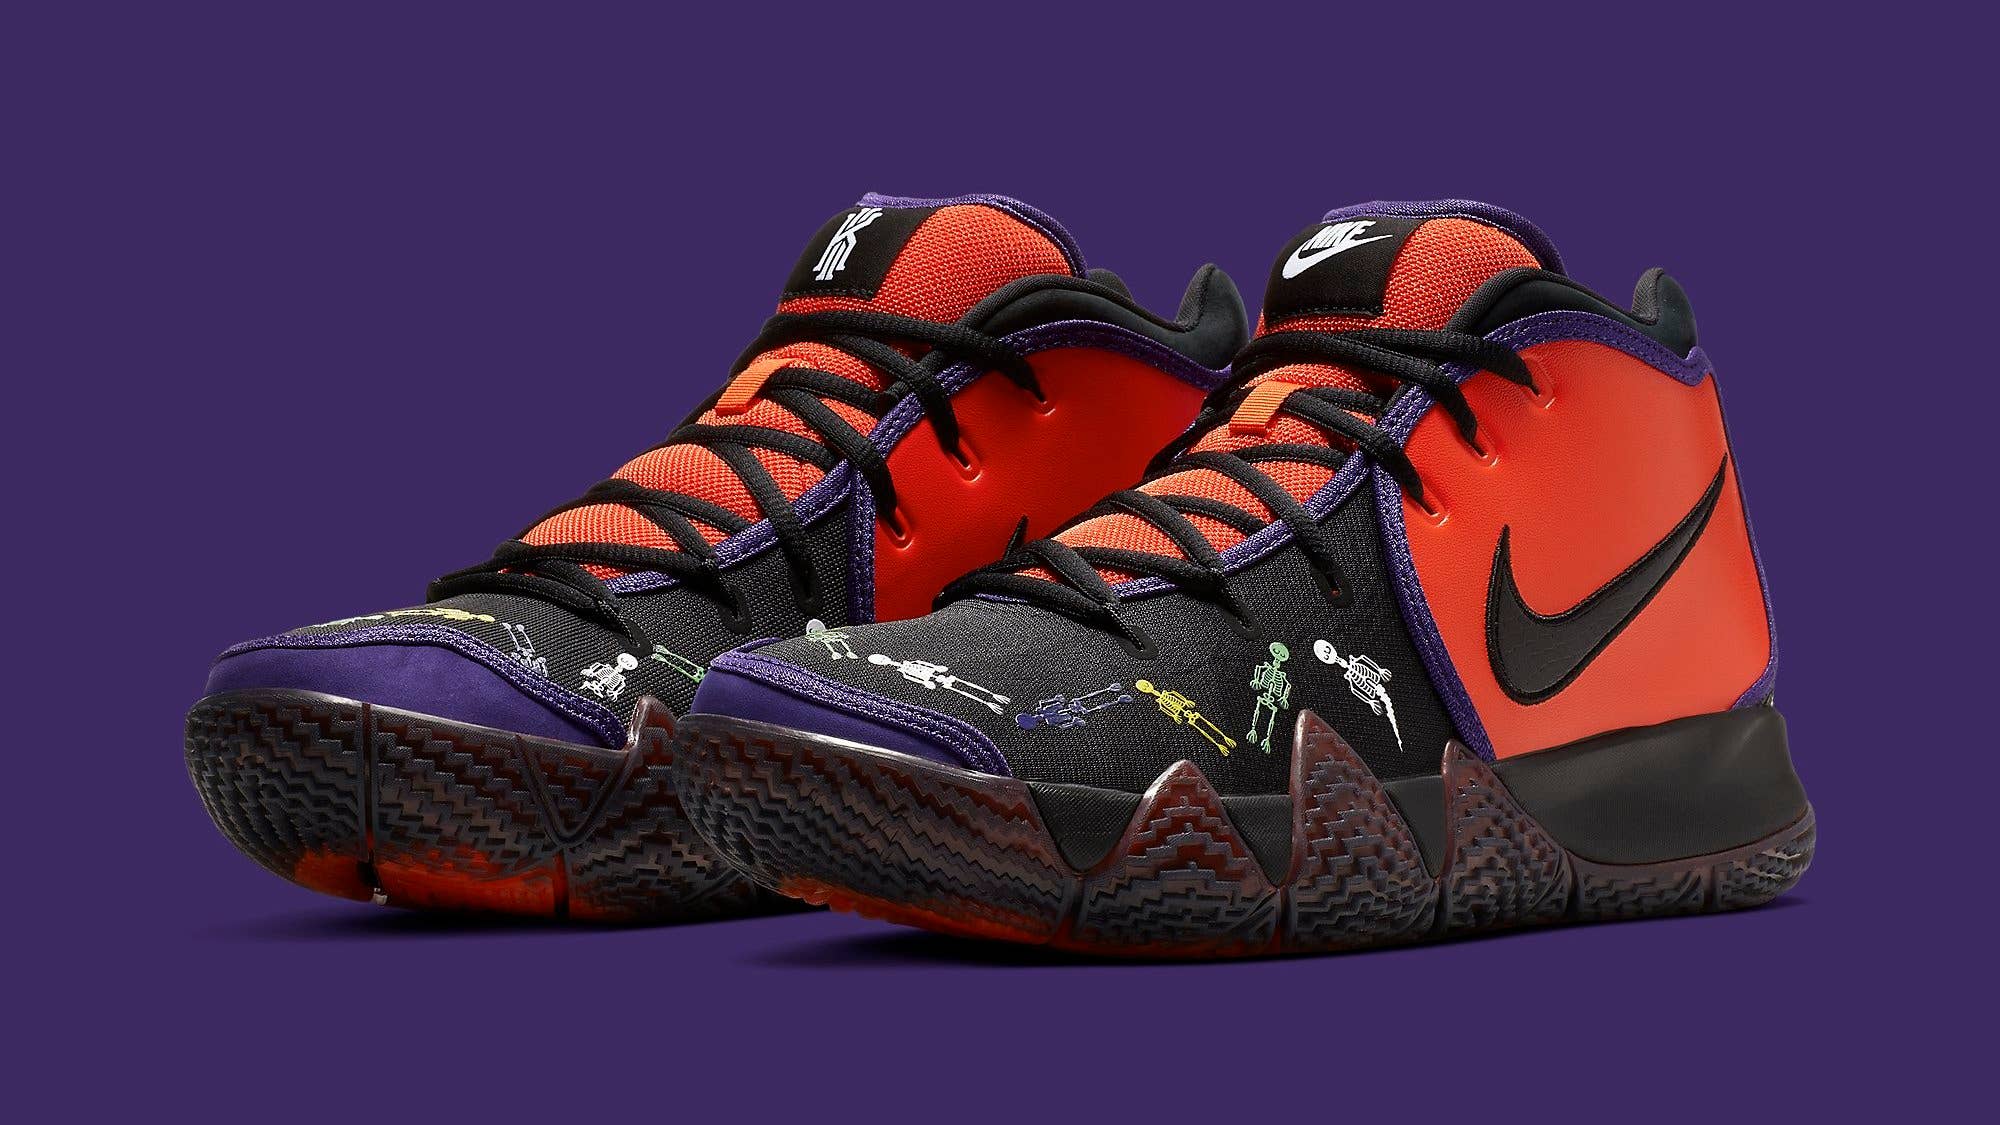 Nike Kyrie 4 'Day of the Dead' CI0278 800 (Pair)